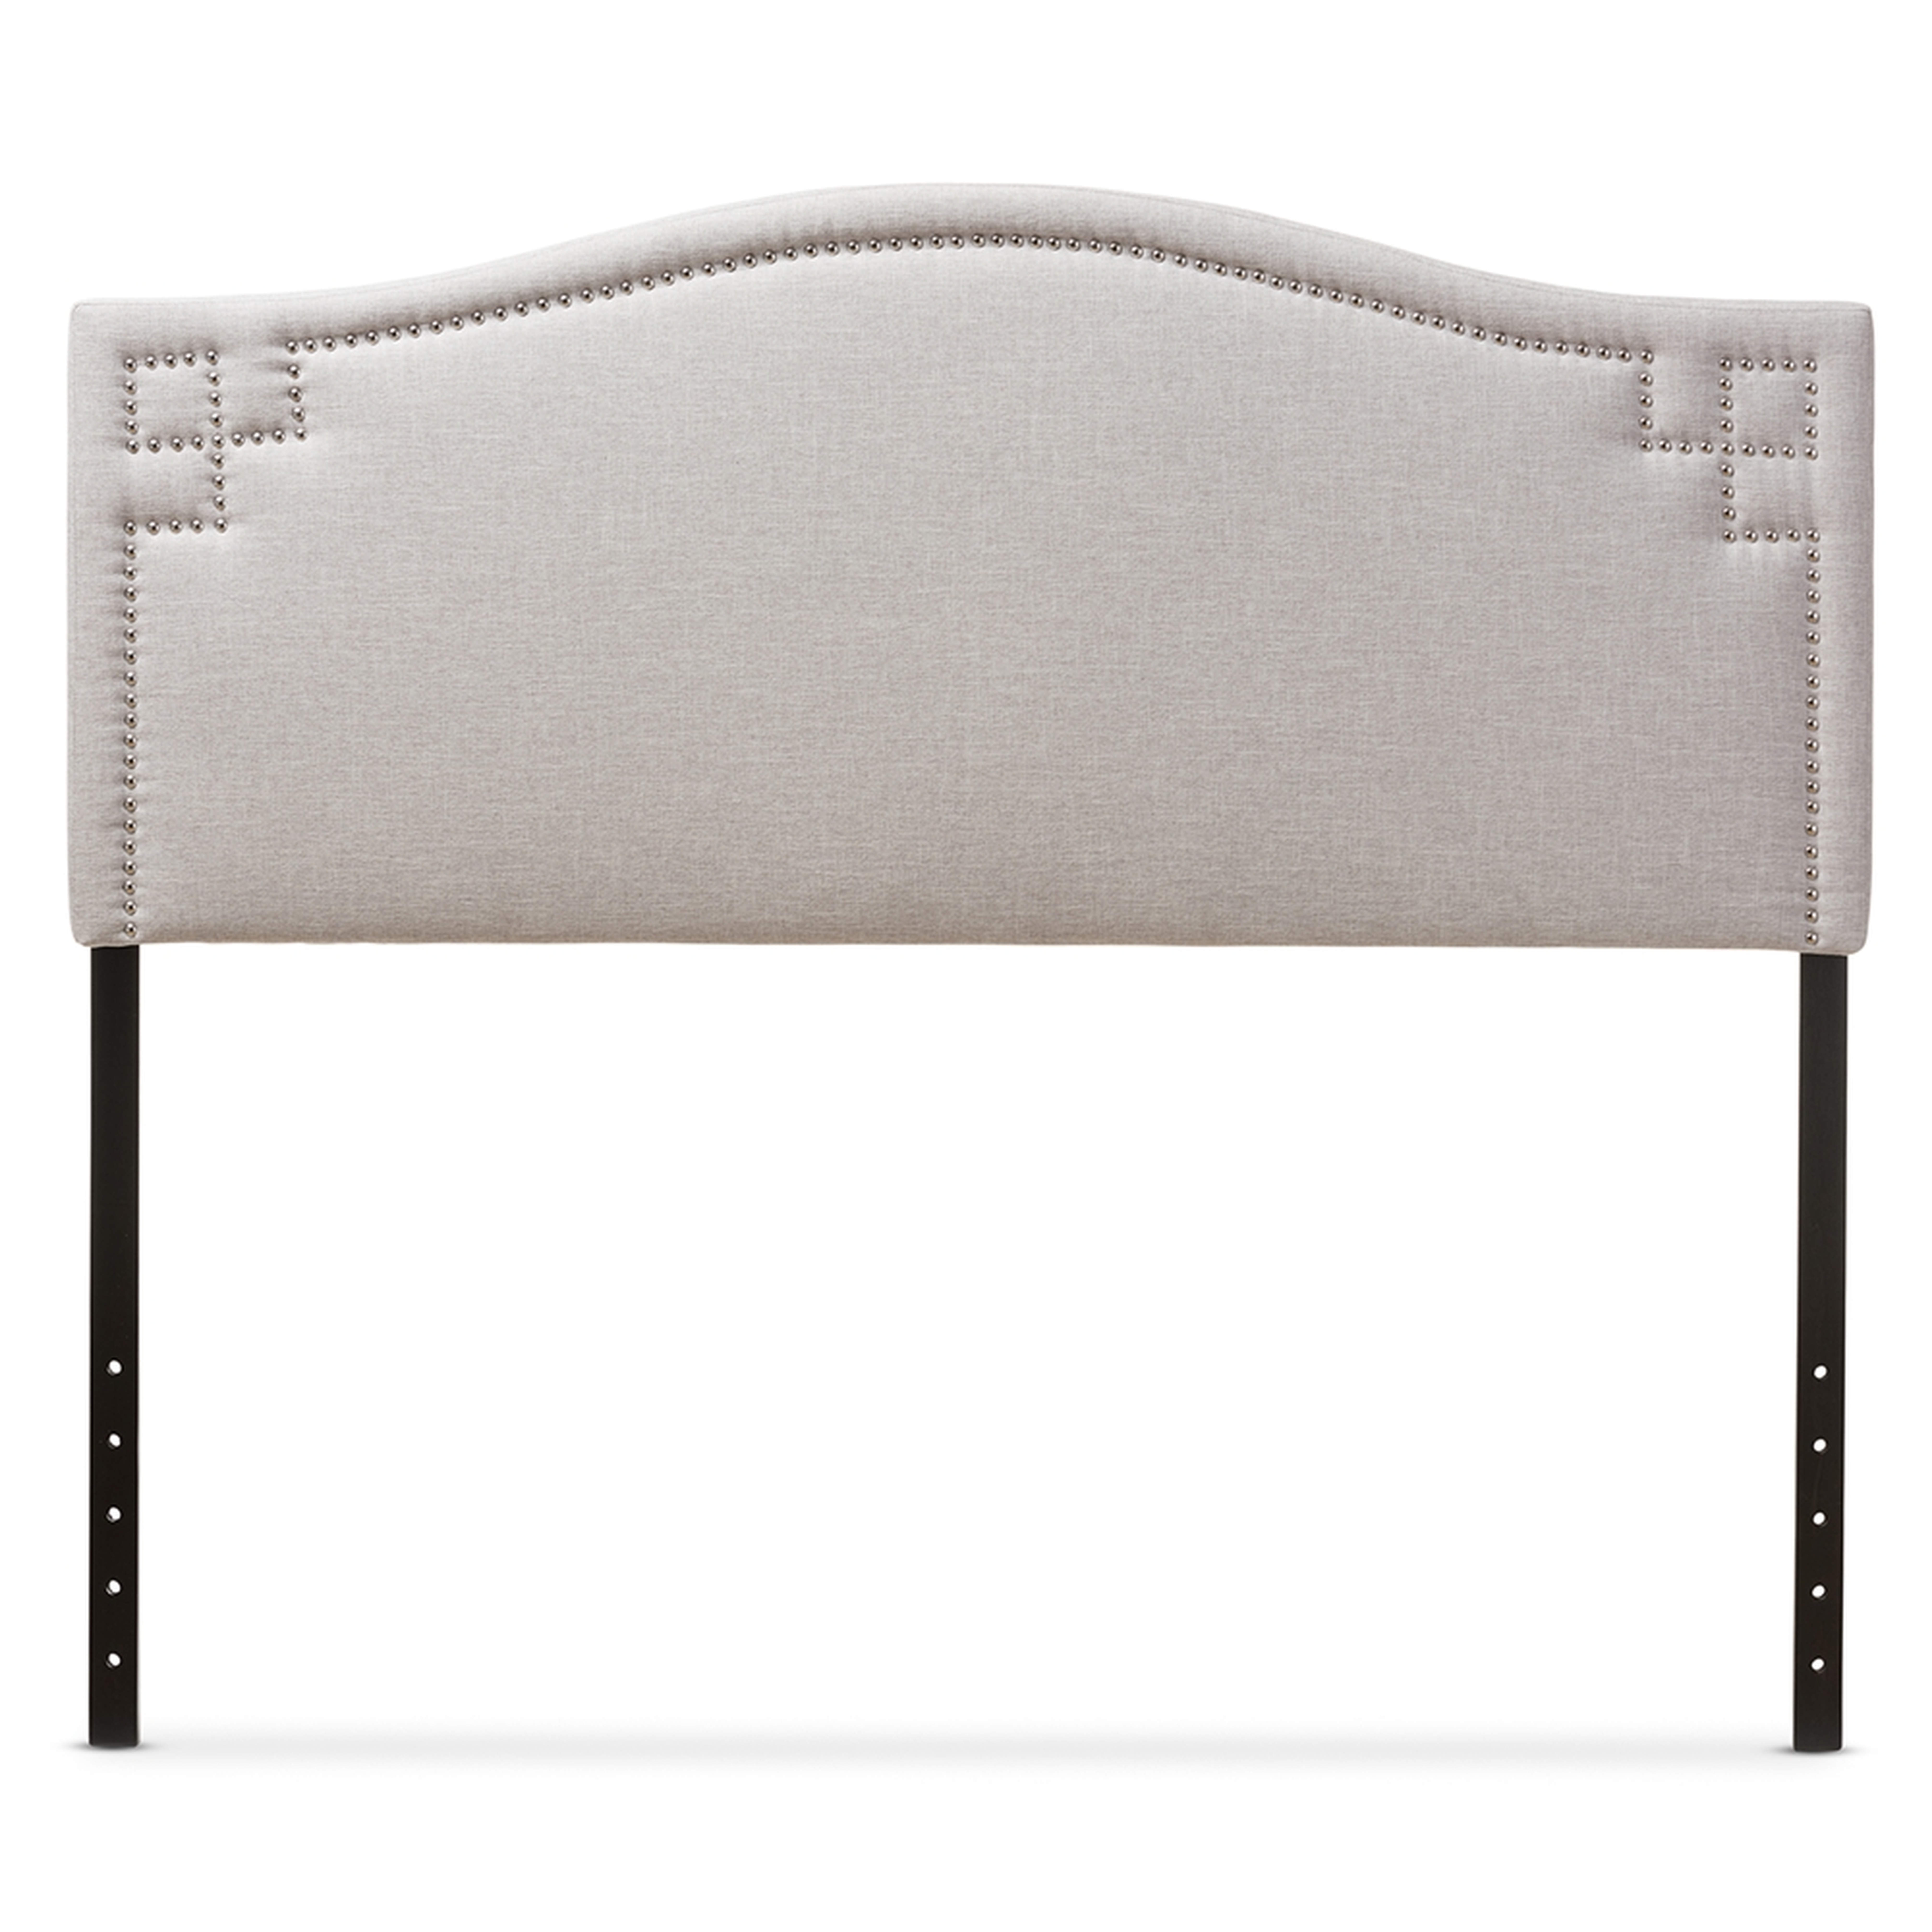 Modern and Contemporary Upholstered King Size Headboard - Lark Interiors